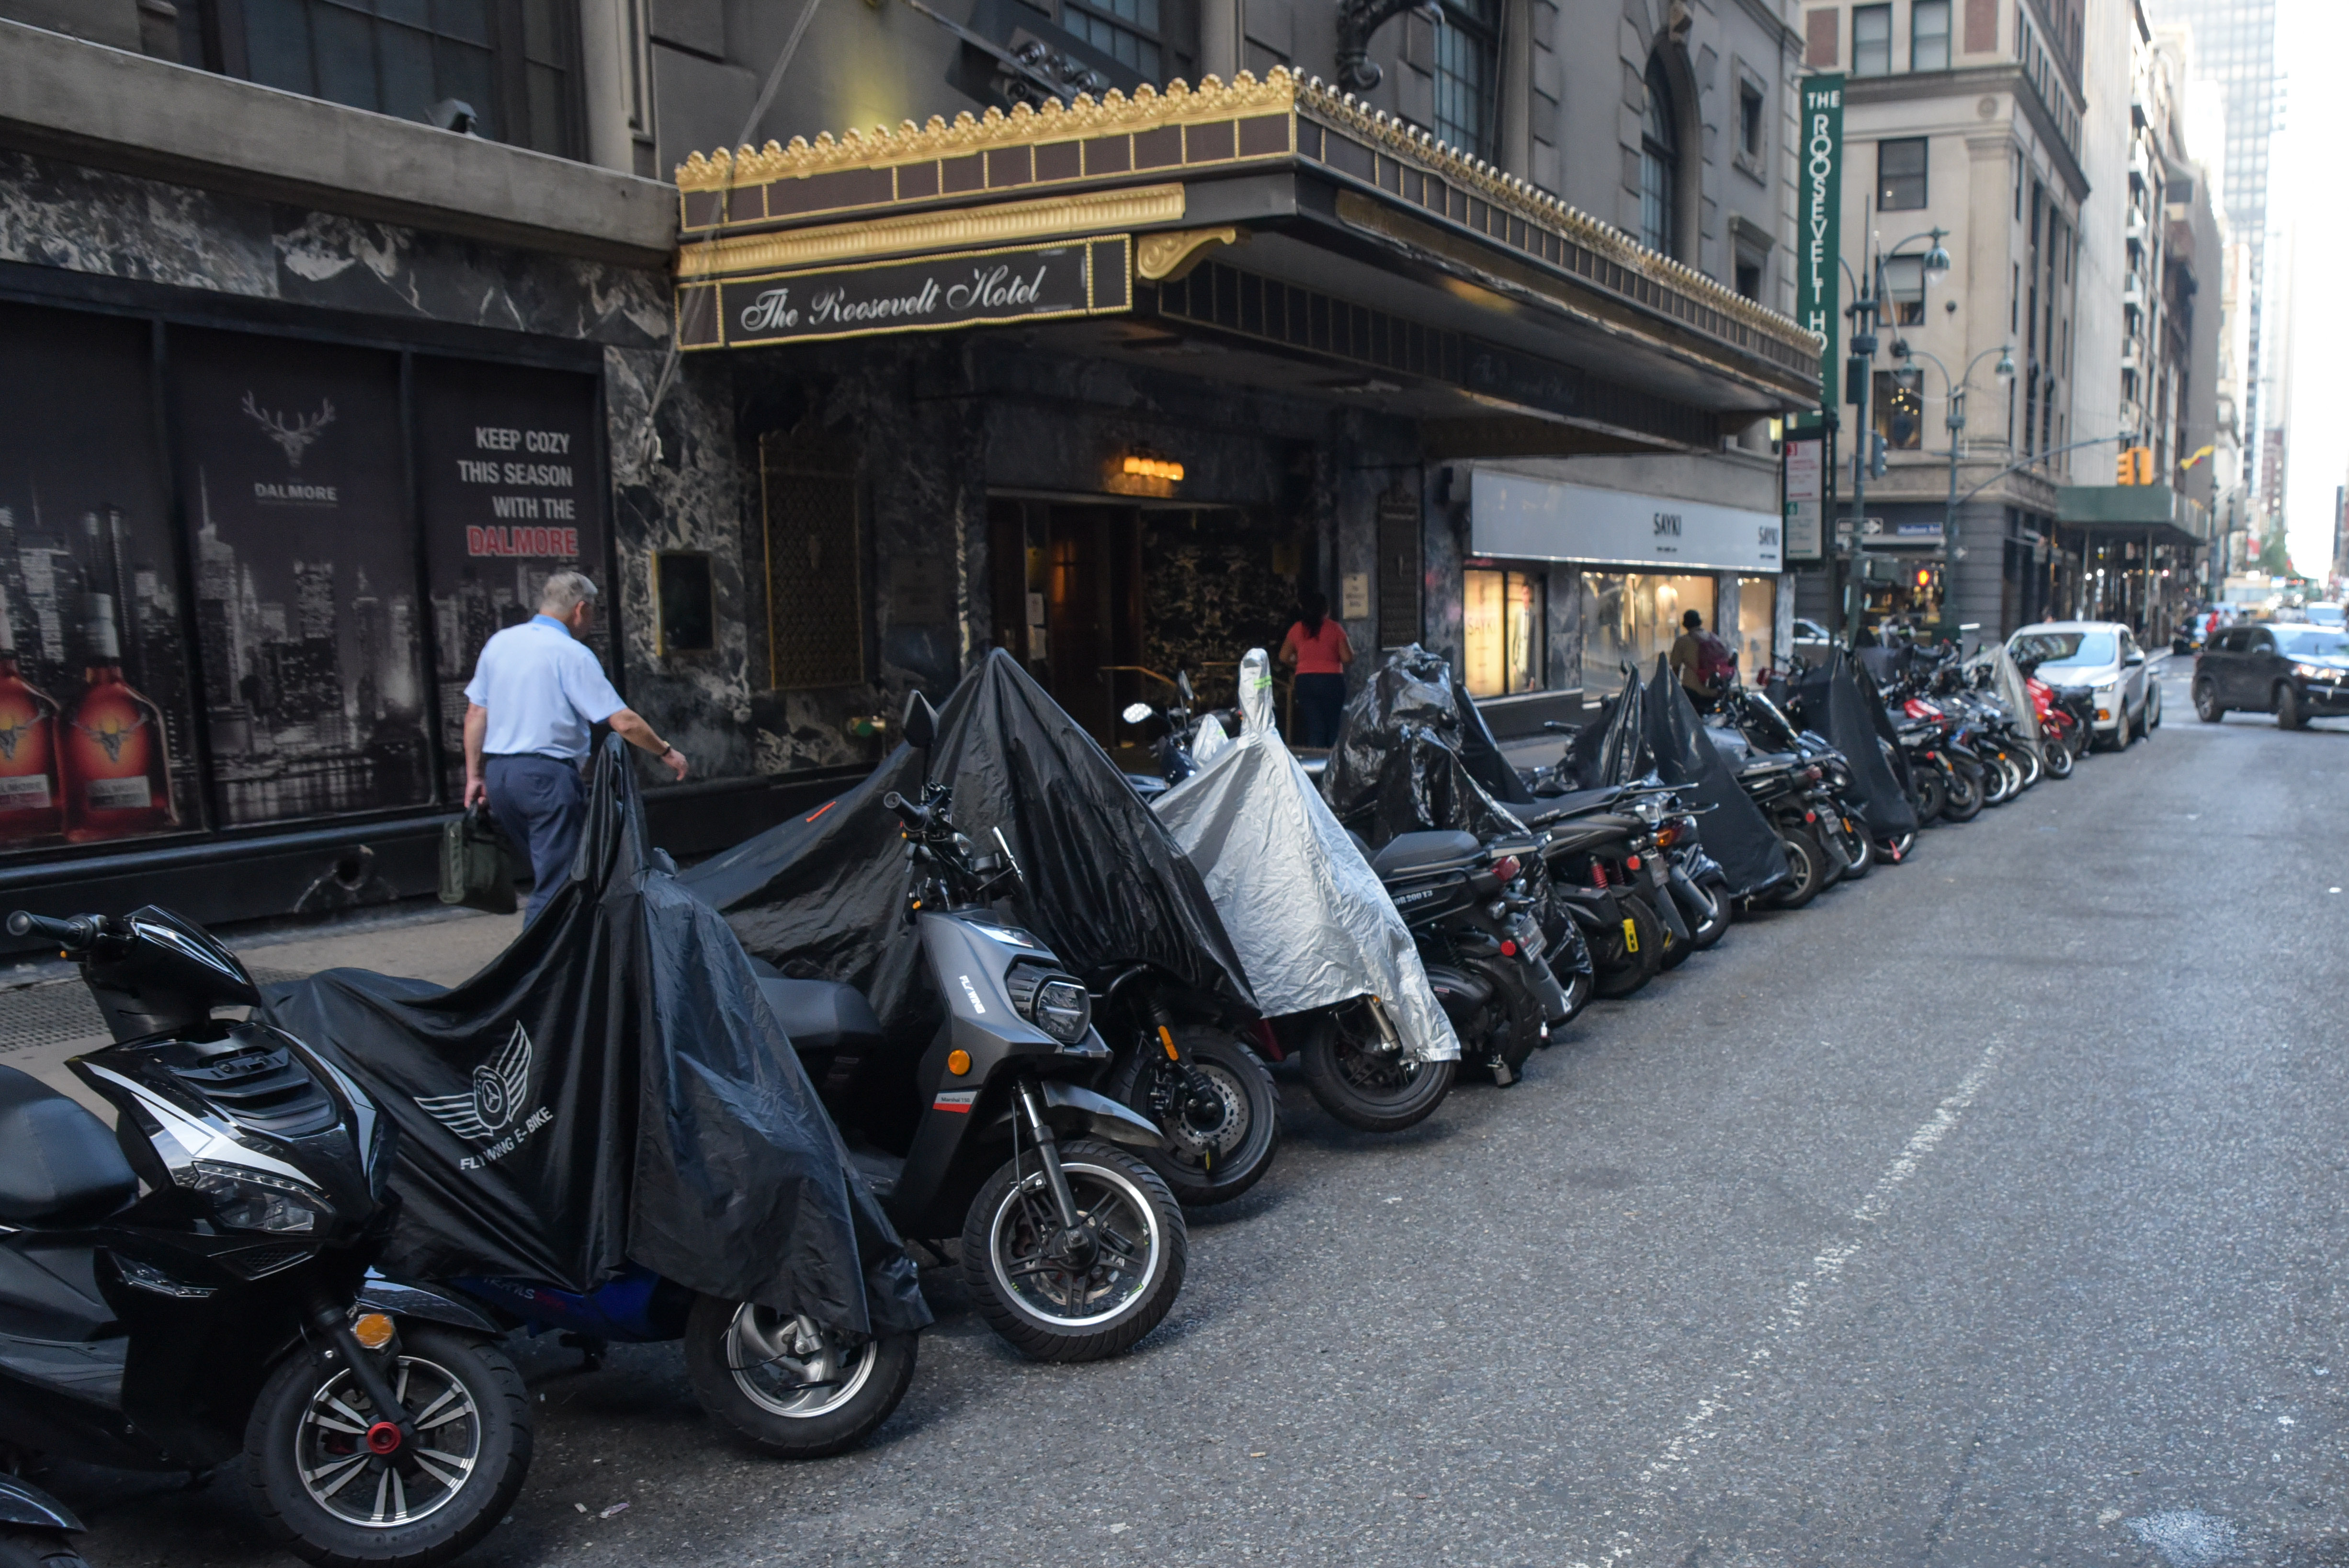 A row of motorcycles parked on the side of a street.